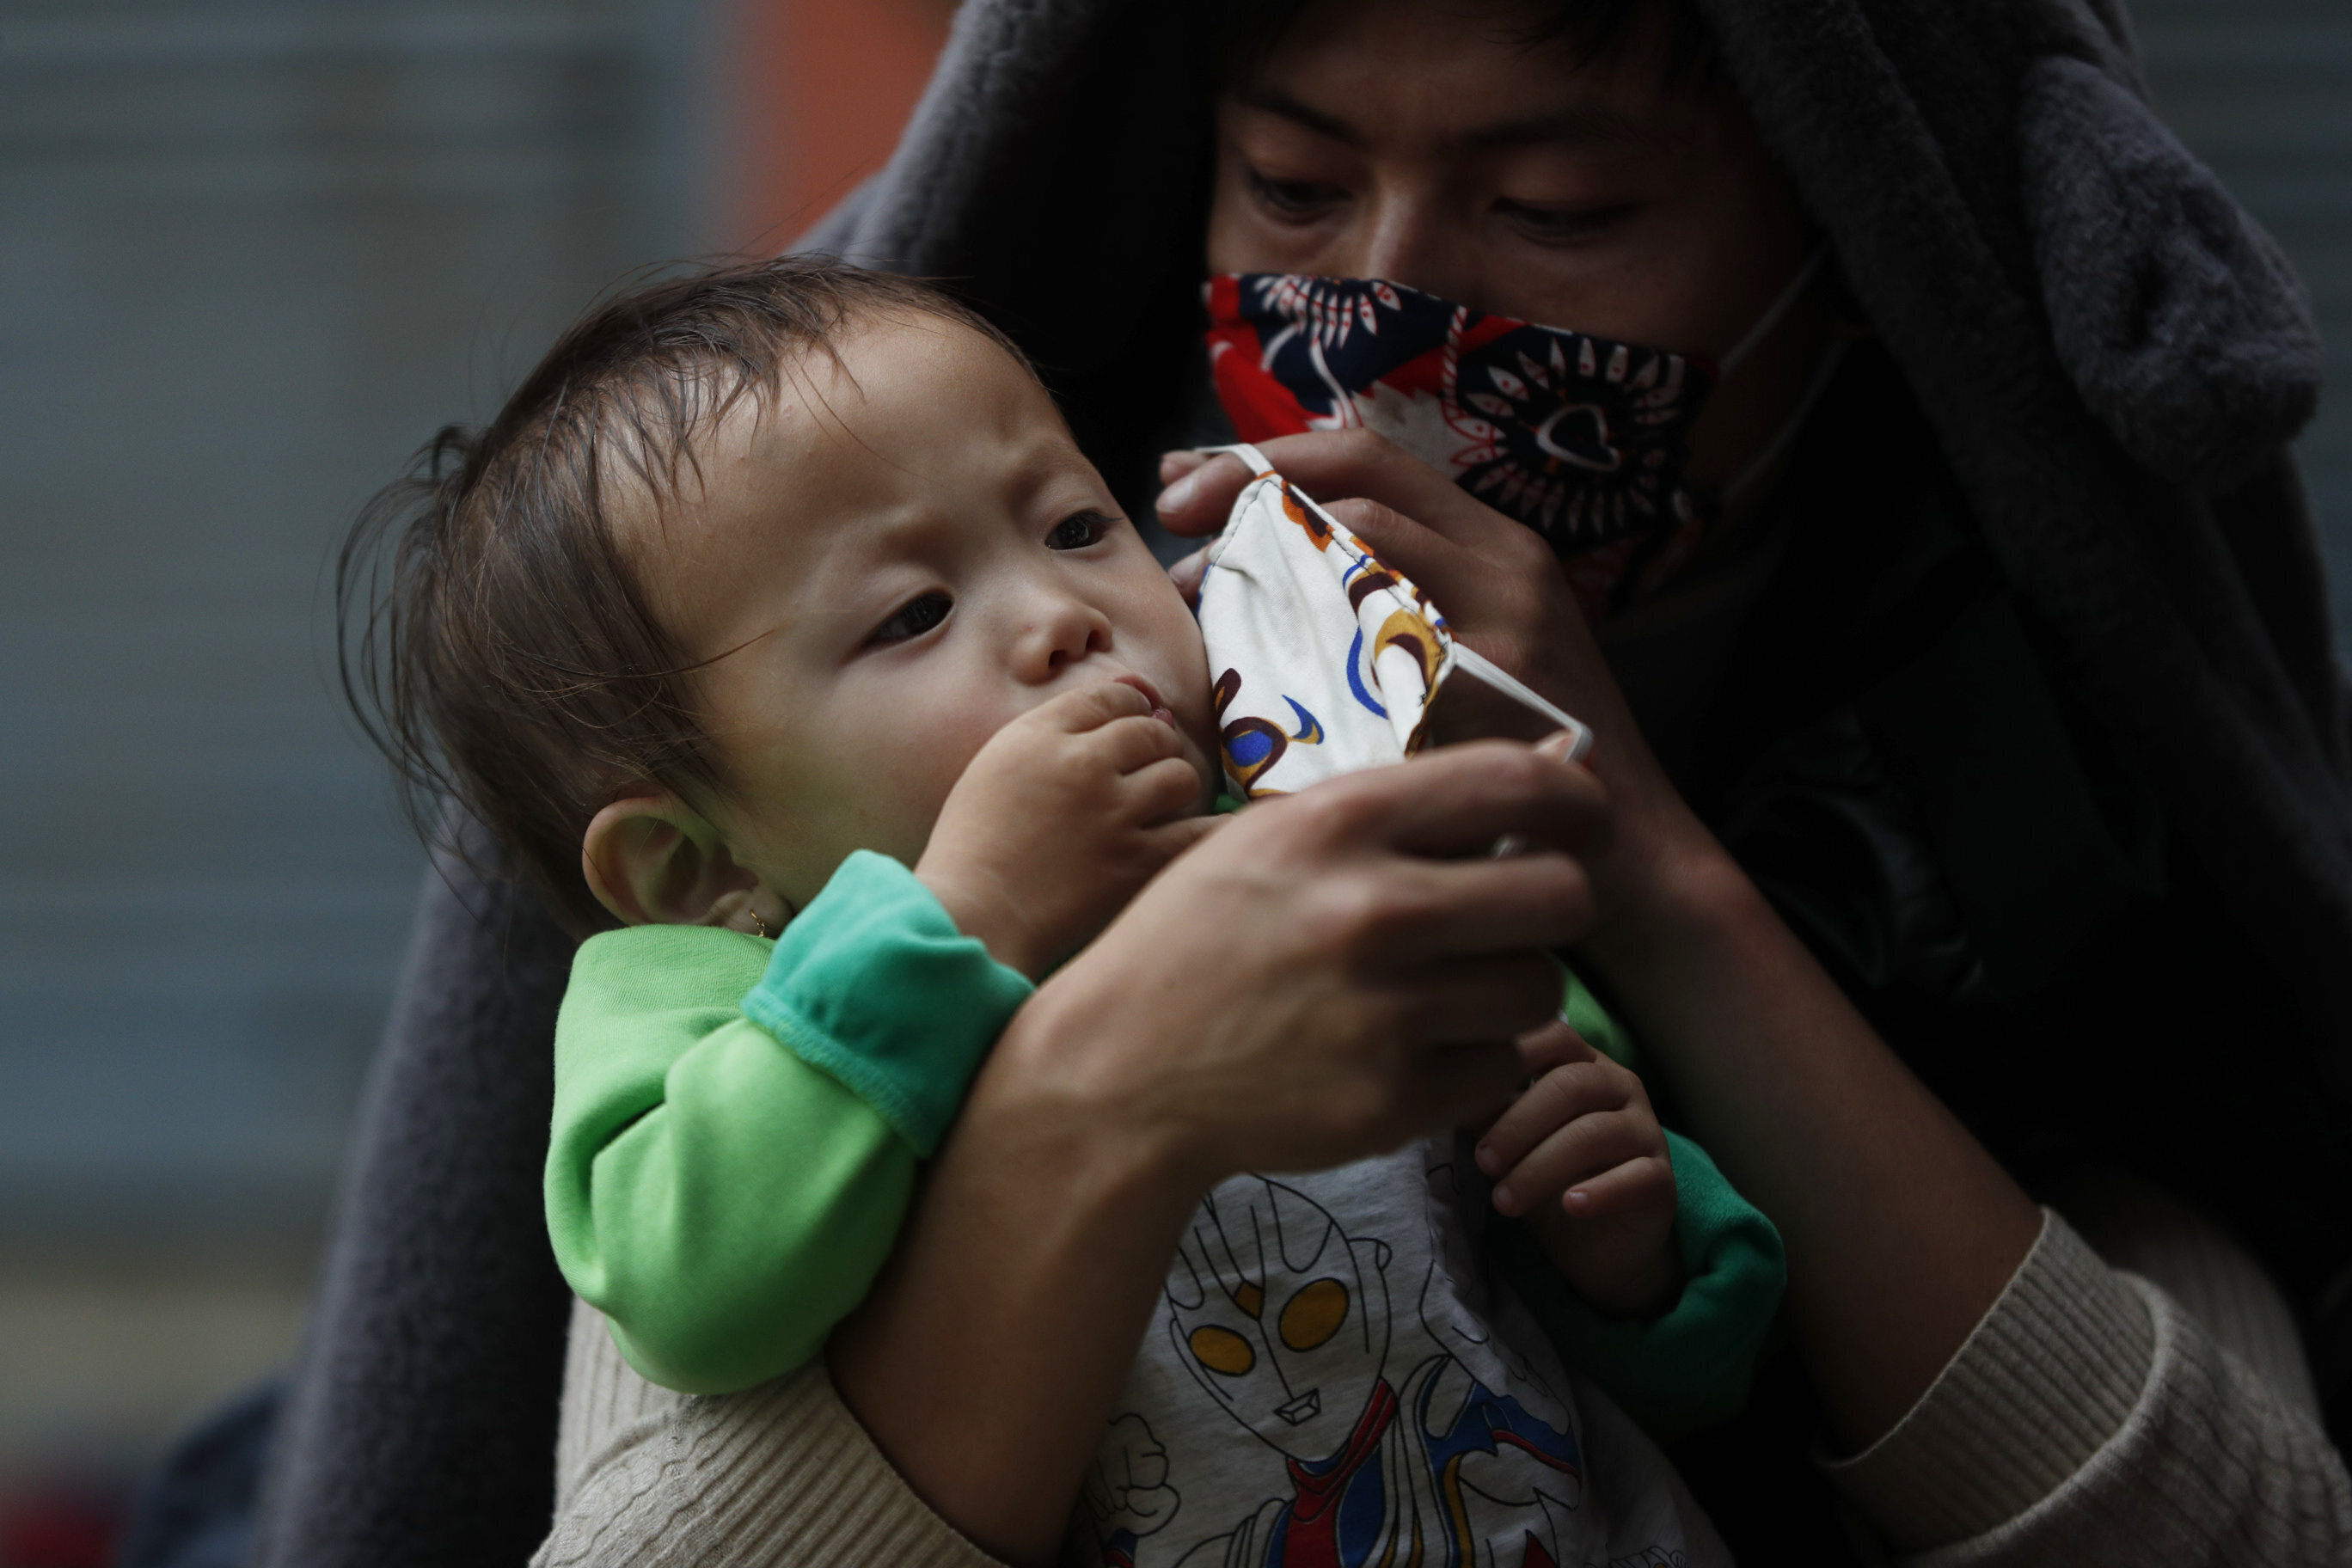 A Nepalese man puts a mask on his child's face as they wait for a vehicle to go back to their village, during lockdown to prevent the spread of the new coronavirus in Bhaktapur, Nepal, Monday, April 20, 2020. The supreme court passed an interim order on Friday instructing the Nepalese government to ensure free transportation for stranded daily wage workers and others making the long journey back to their respective villages on foot. (AP Photo/Niranjan Shrestha)